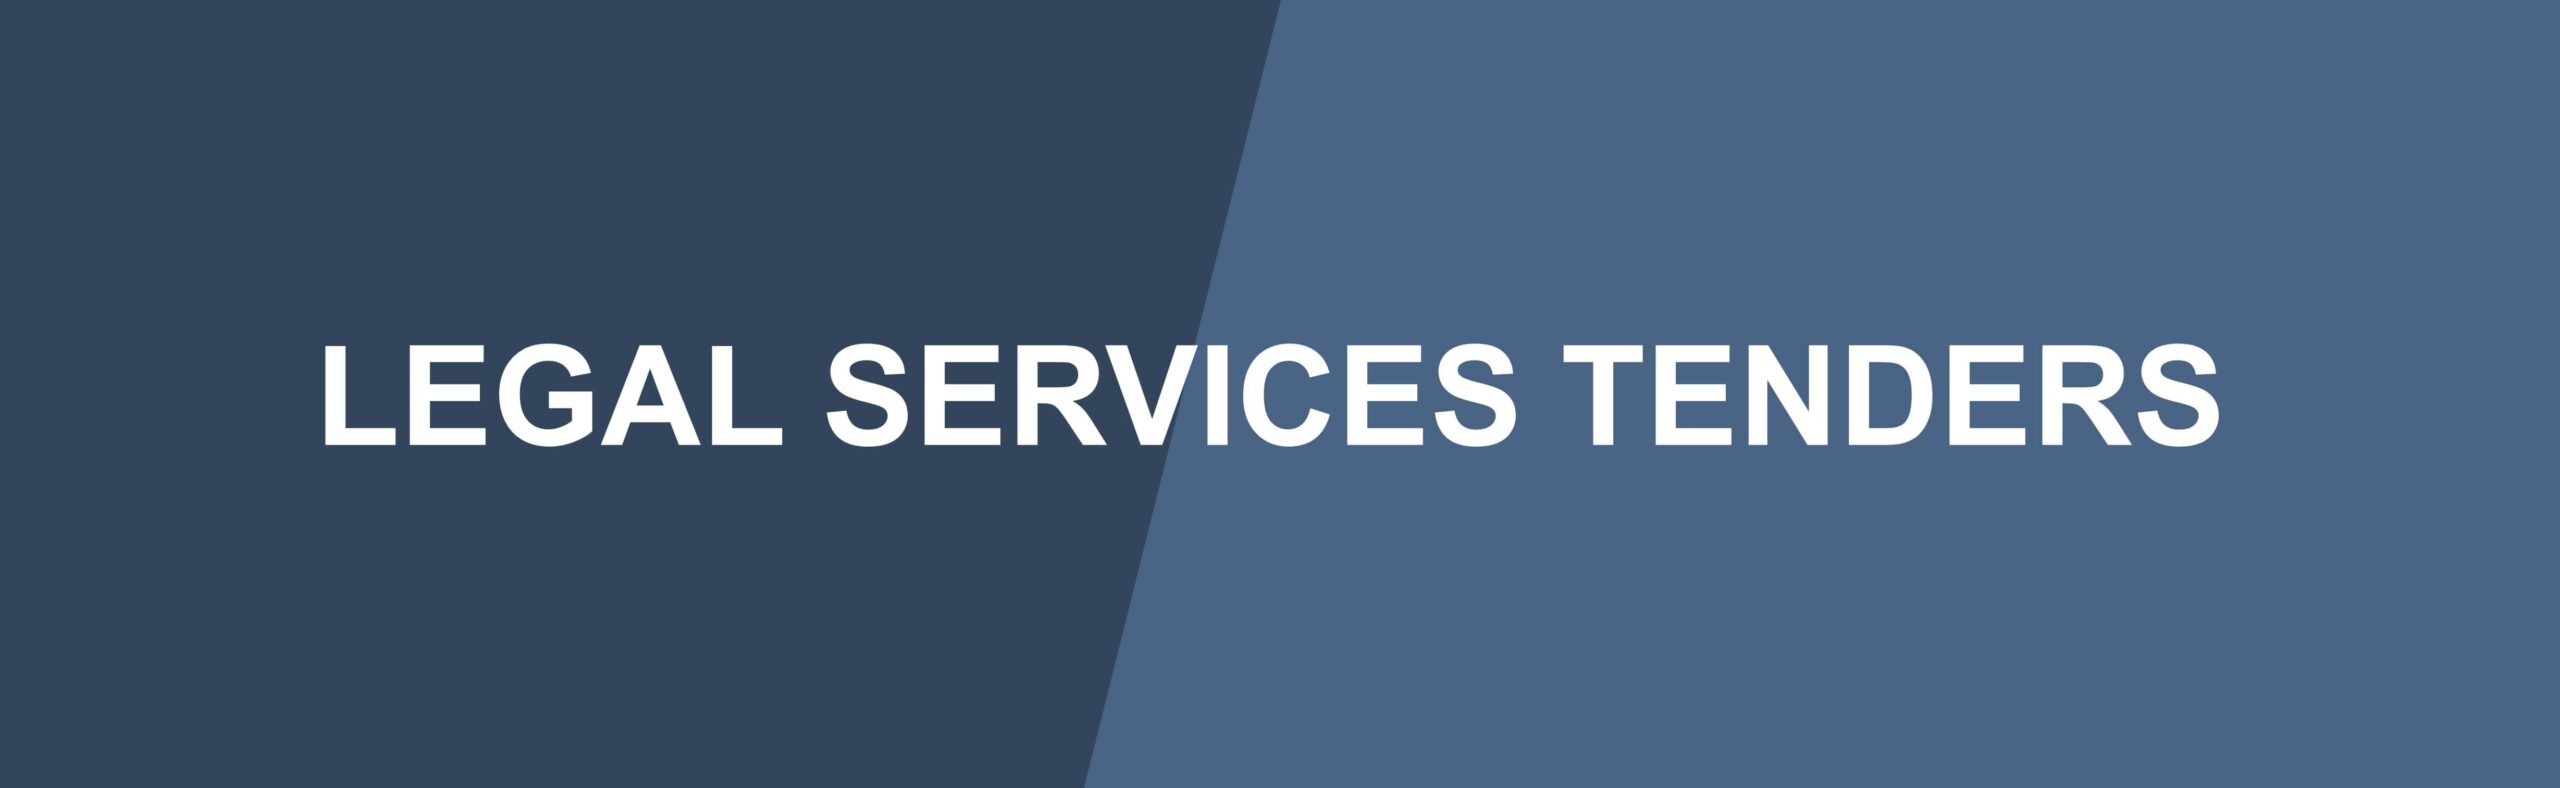 Legal Services Tenders and Bids